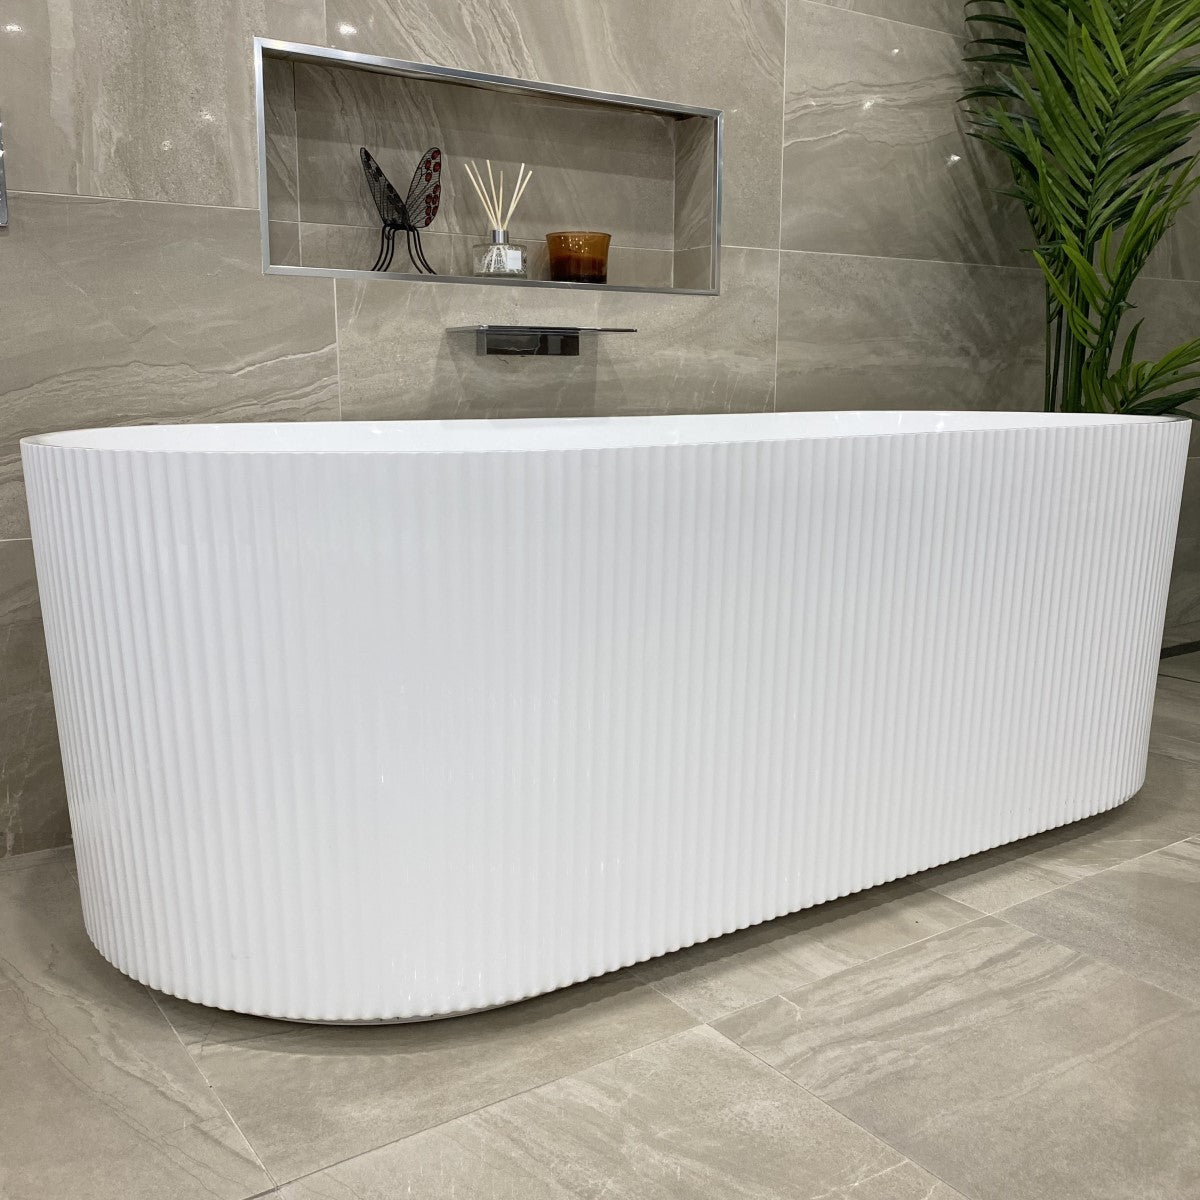 Brighton Groove 1500mm Fluted Oval Freestanding Bath, Gloss White